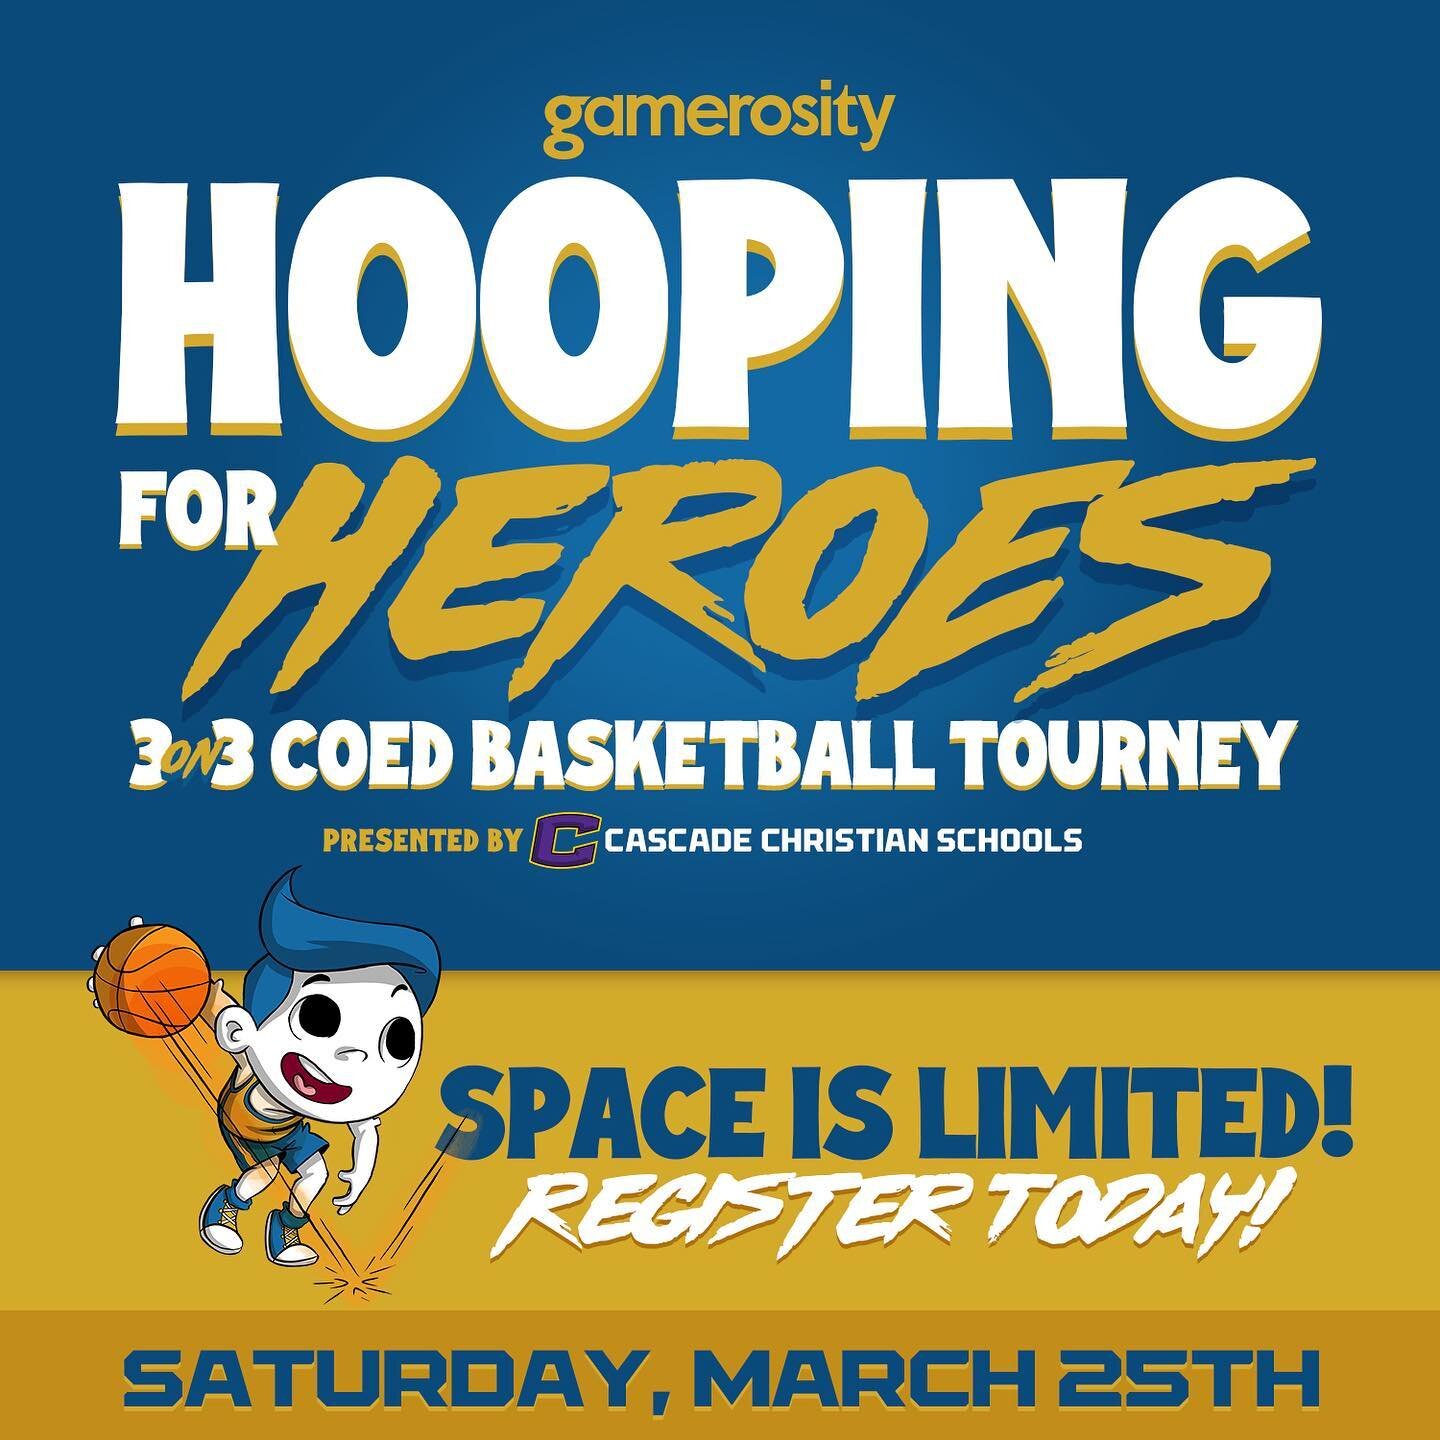 Community is everything and our friends at @gamerosity are intersecting 3 things we love! Community, Kids, and Hoops!
.
March 25th at @cchsmedford Jr High Courts, they&rsquo;re hosting a 3on3 Basketball Tournament benefitting kids with cancer! It&rsq